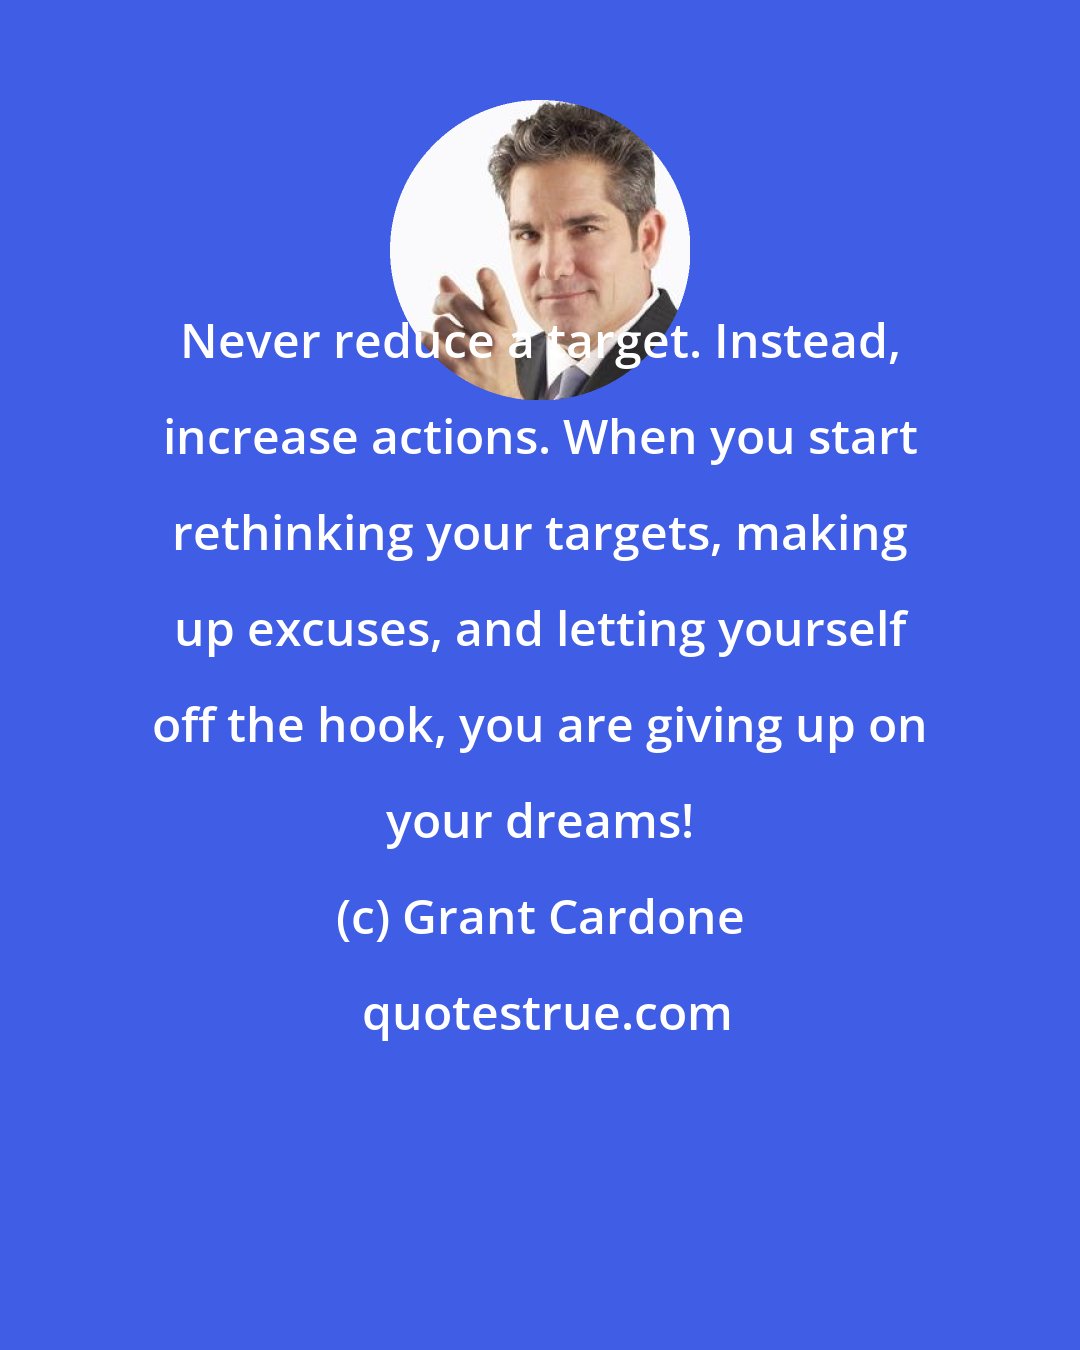 Grant Cardone: Never reduce a target. Instead, increase actions. When you start rethinking your targets, making up excuses, and letting yourself off the hook, you are giving up on your dreams!